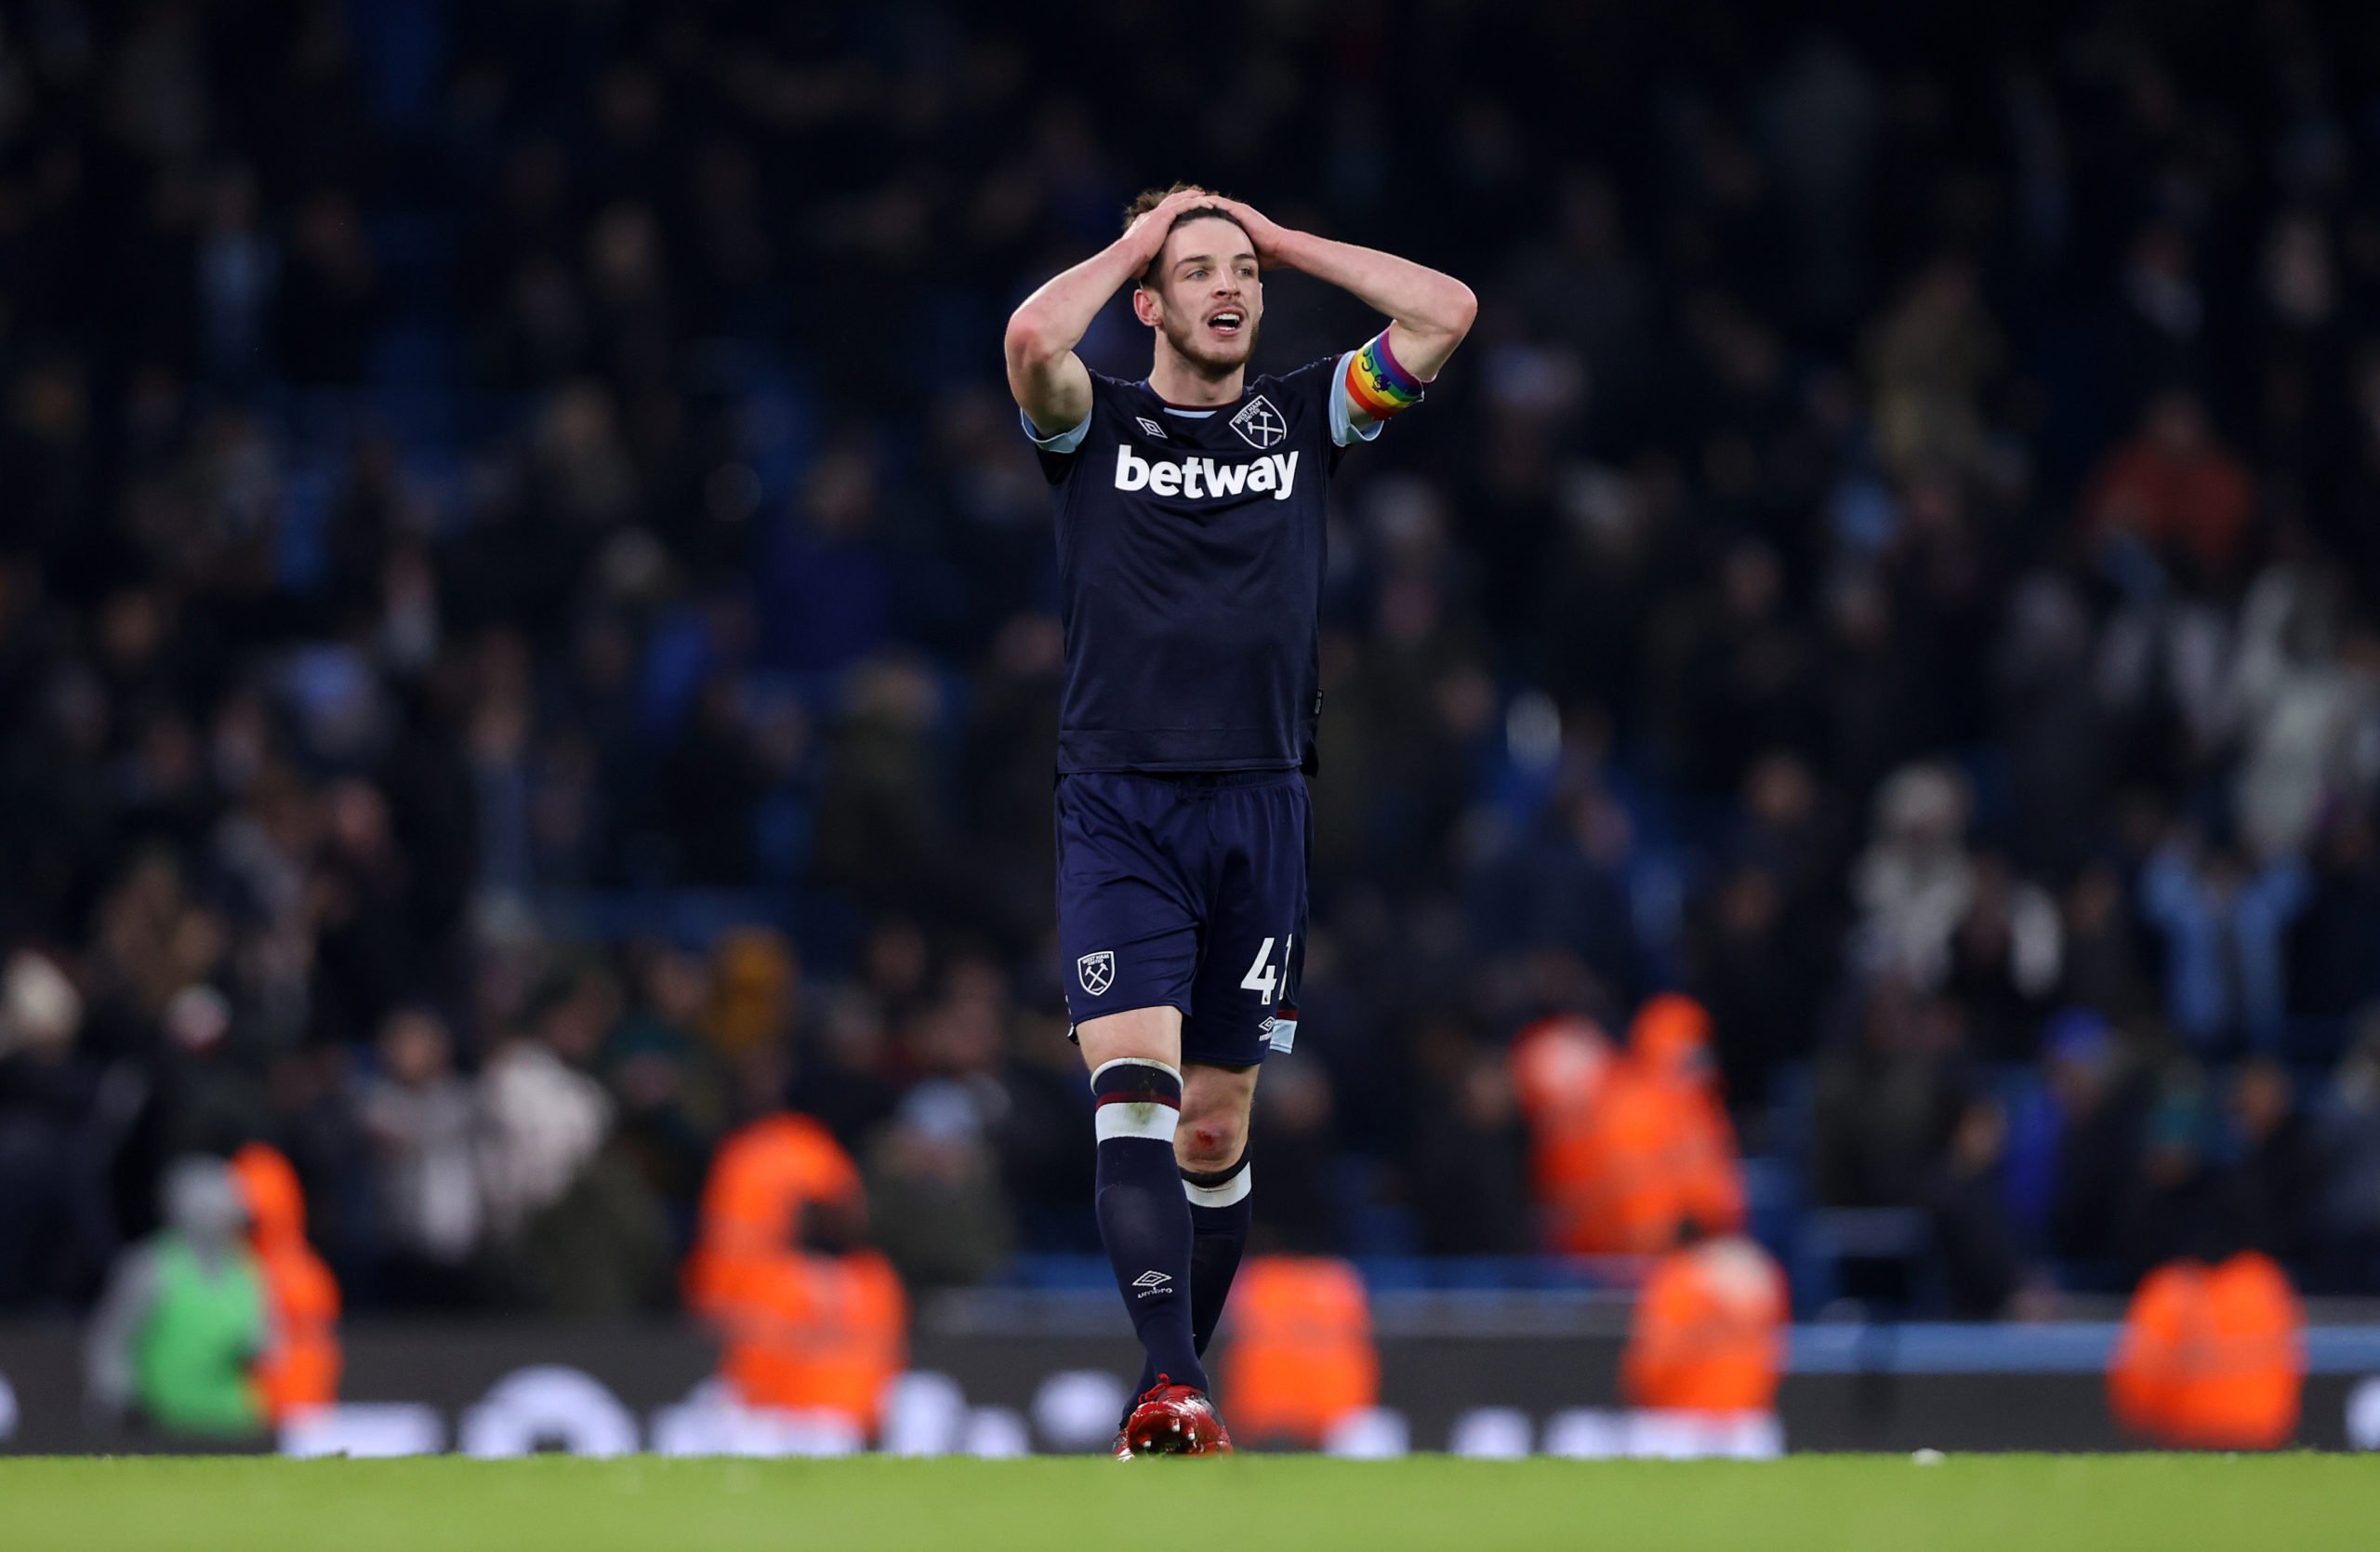 MANCHESTER, ENGLAND - NOVEMBER 28: Declan Rice of West Ham United reacts following defeat in the Premier League match between Manchester City and West Ham United at Etihad Stadium on November 28, 2021 in Manchester, England. (Photo by Naomi Baker/Getty Images)The 4th Official uses images provided by the following image agency: Getty Images (https://www.gettyimages.de/) Imago Images (https://www.imago-images.de/)